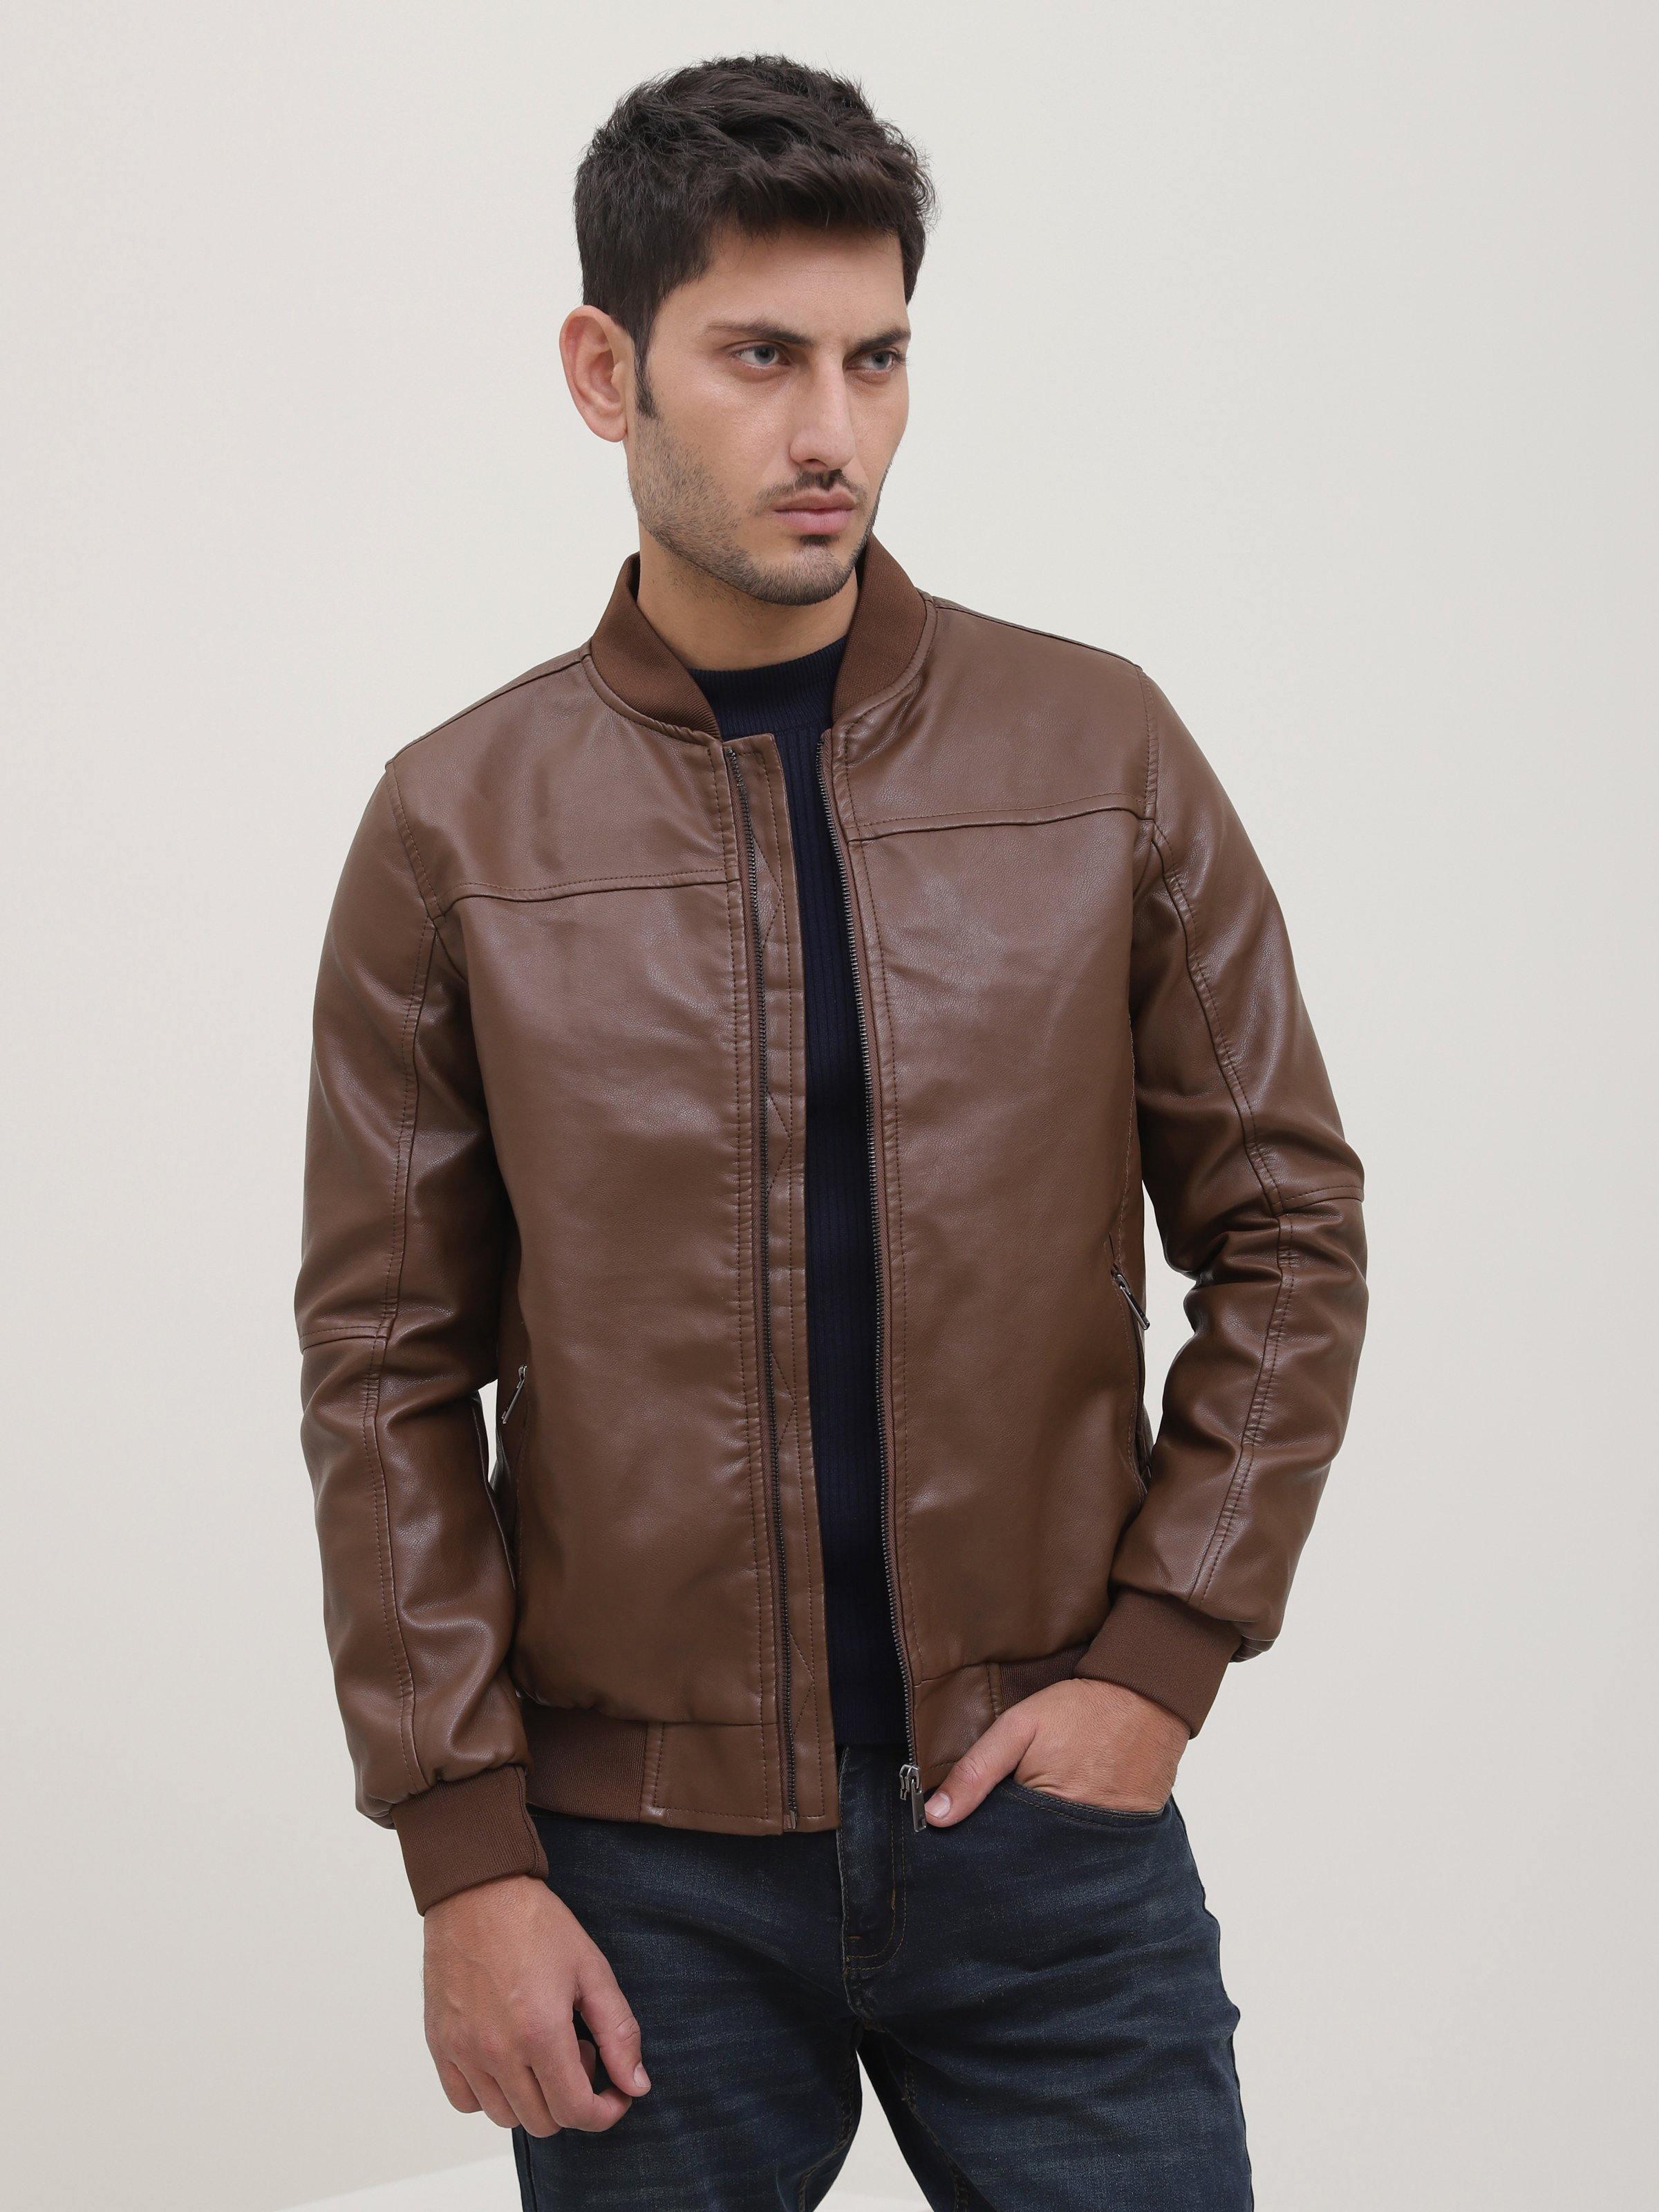 JACKET FULL SLEEVE PU LEATHER BROWN at Charcoal Clothing